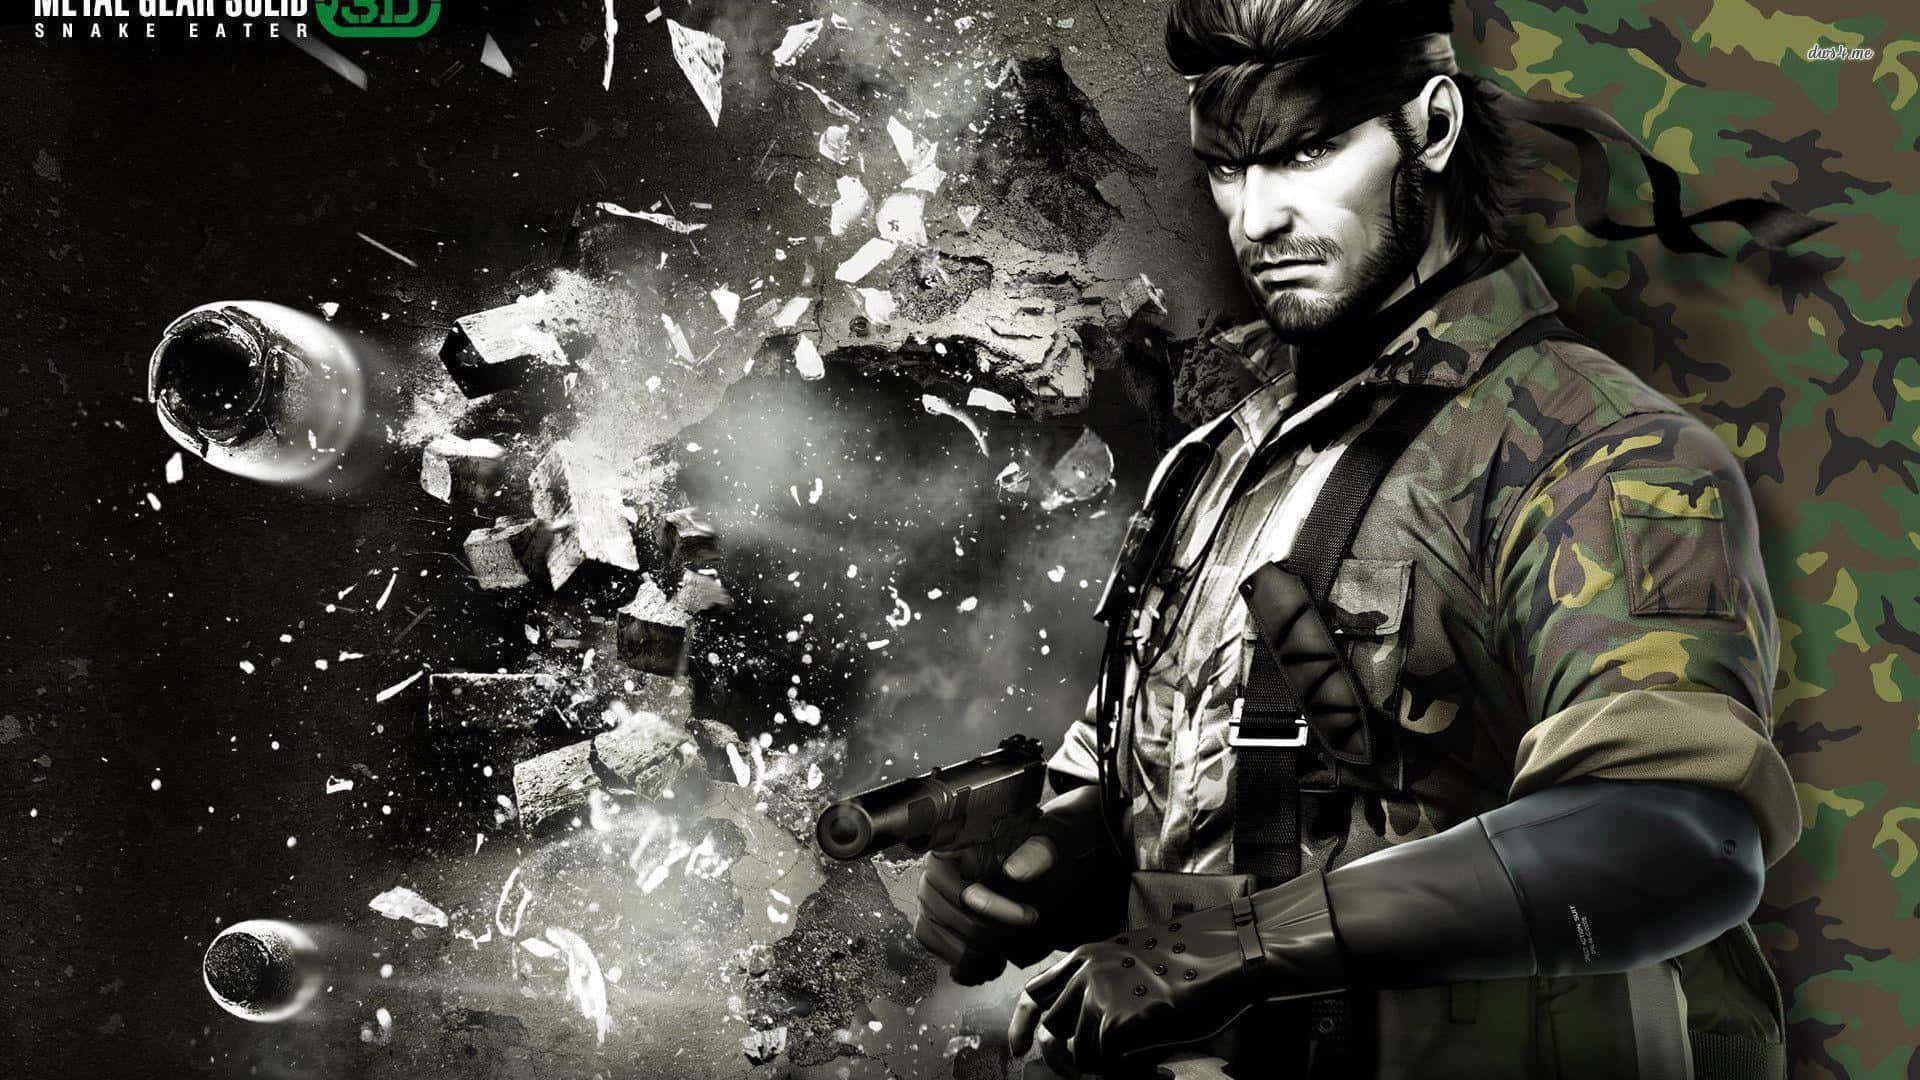 Solid Snake Is Ready To Take On His Mission